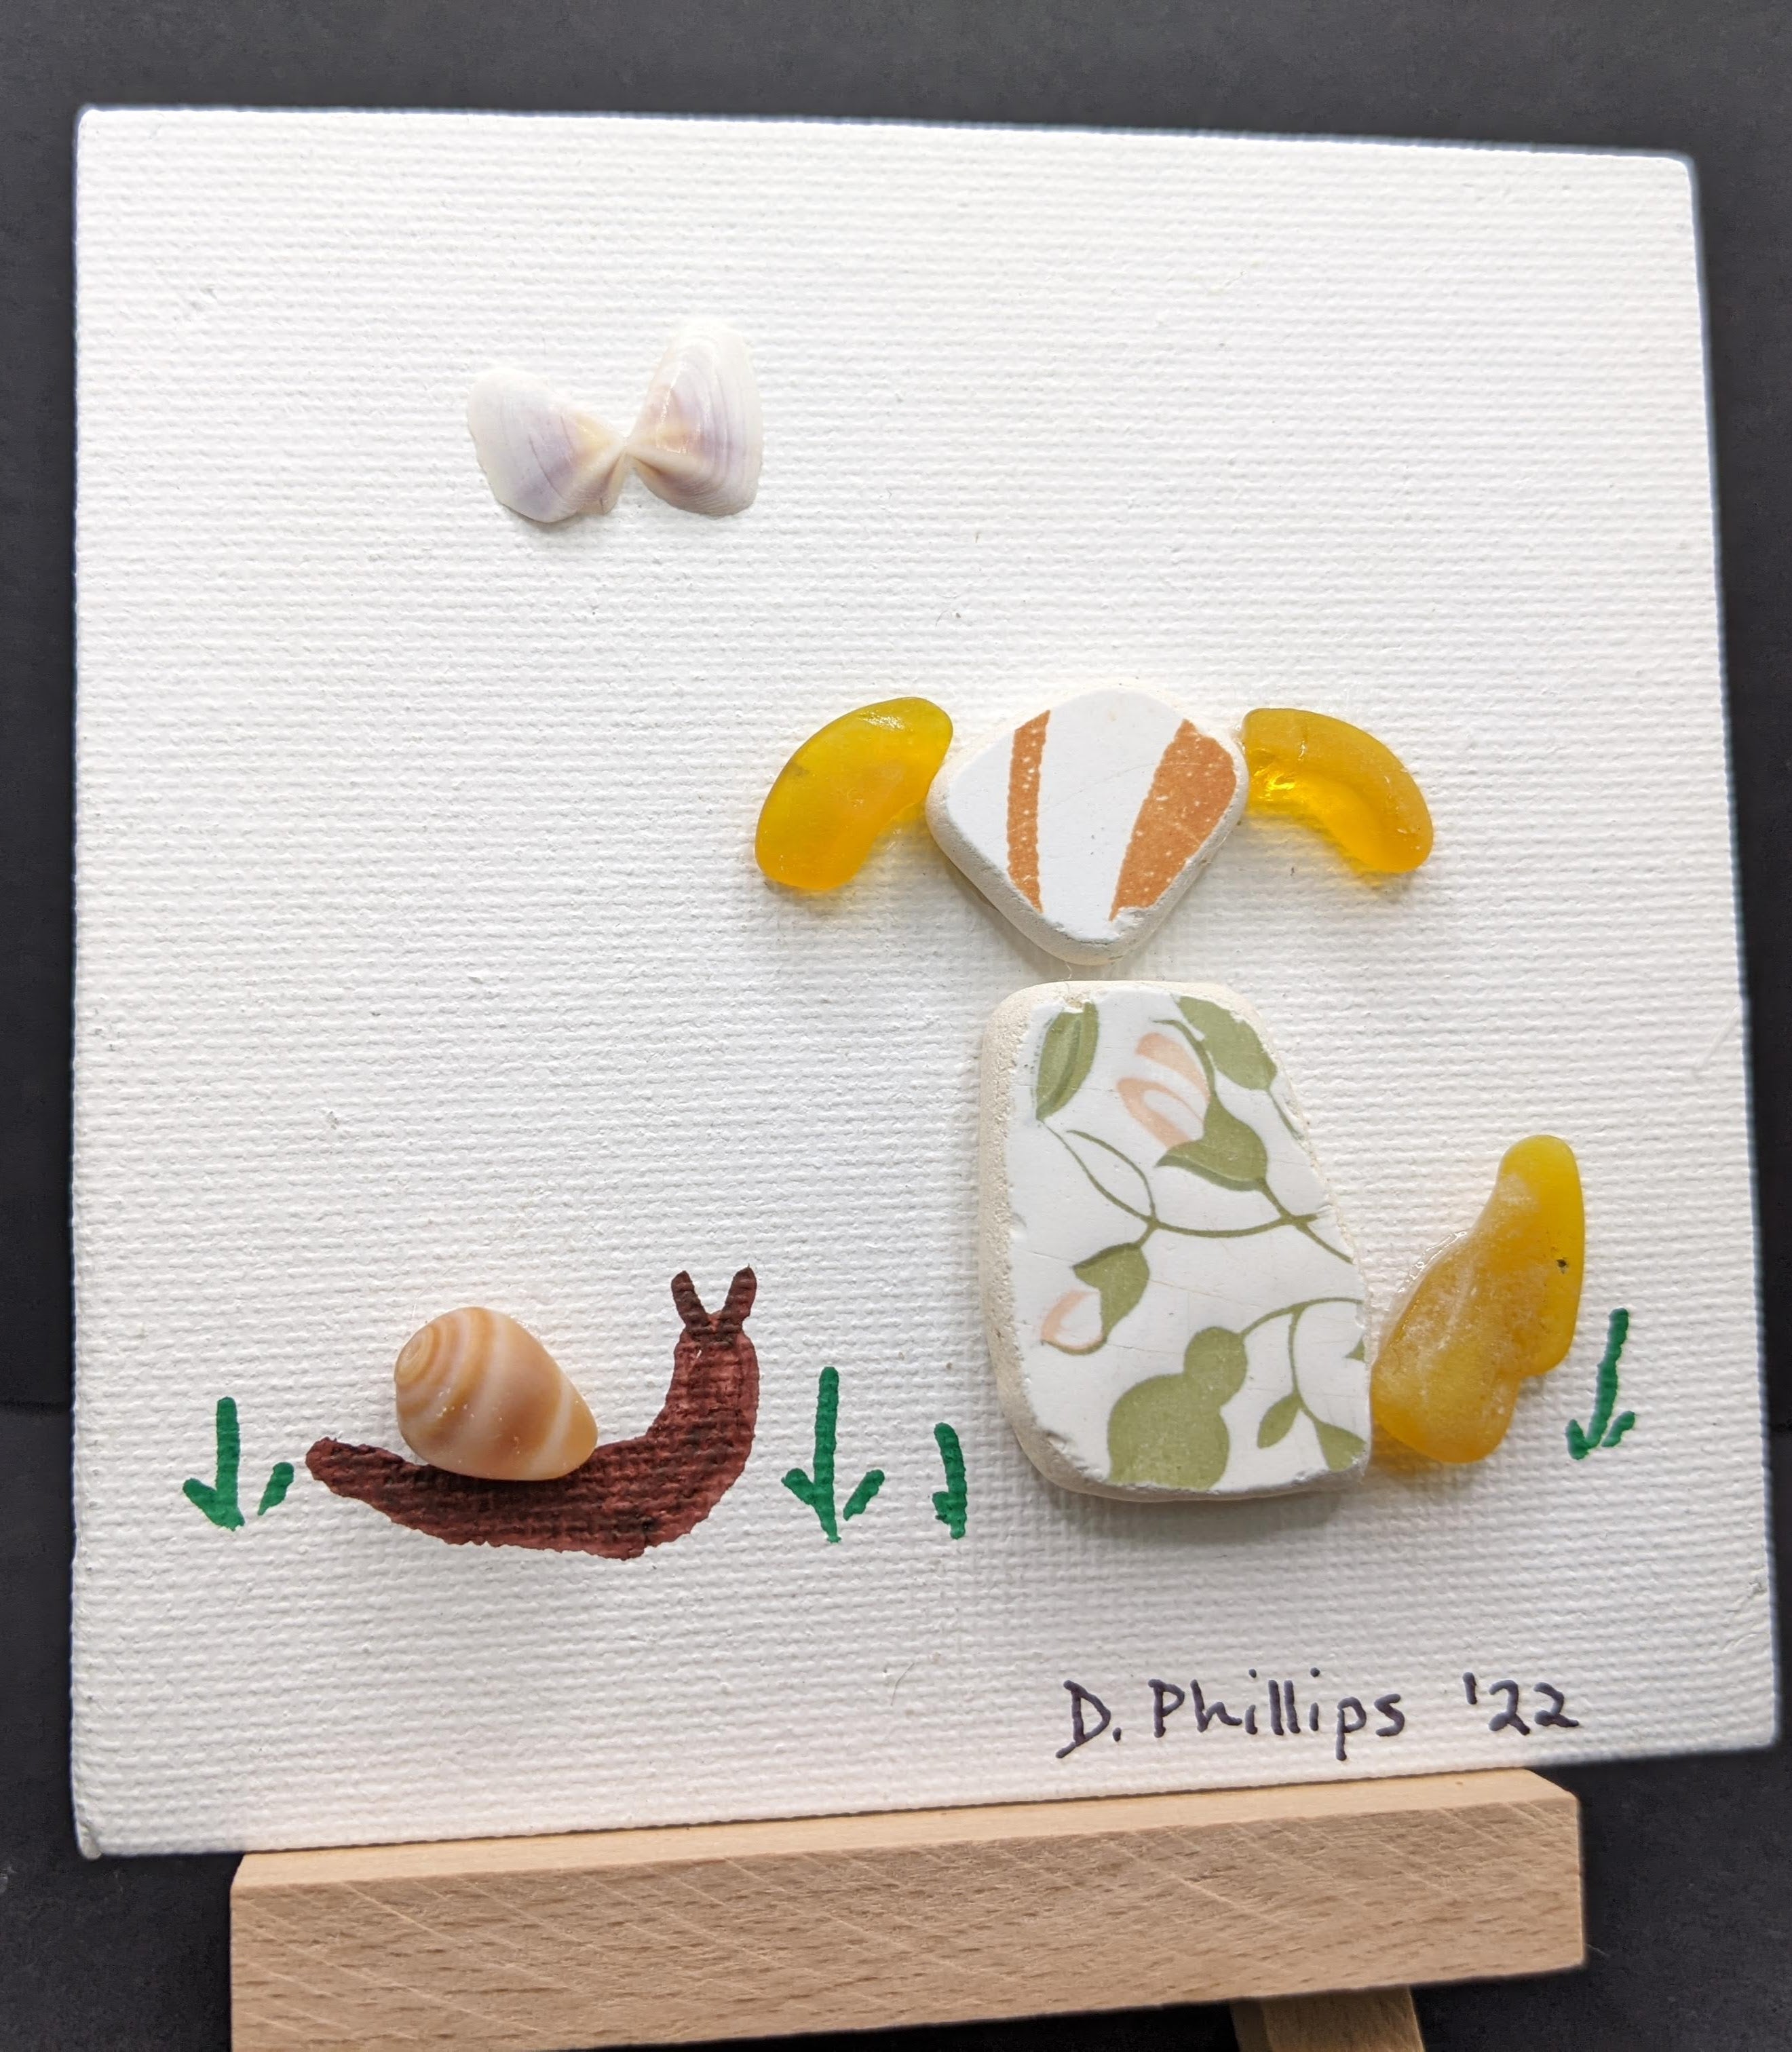 Sea pottery dog, butterfly, and snail